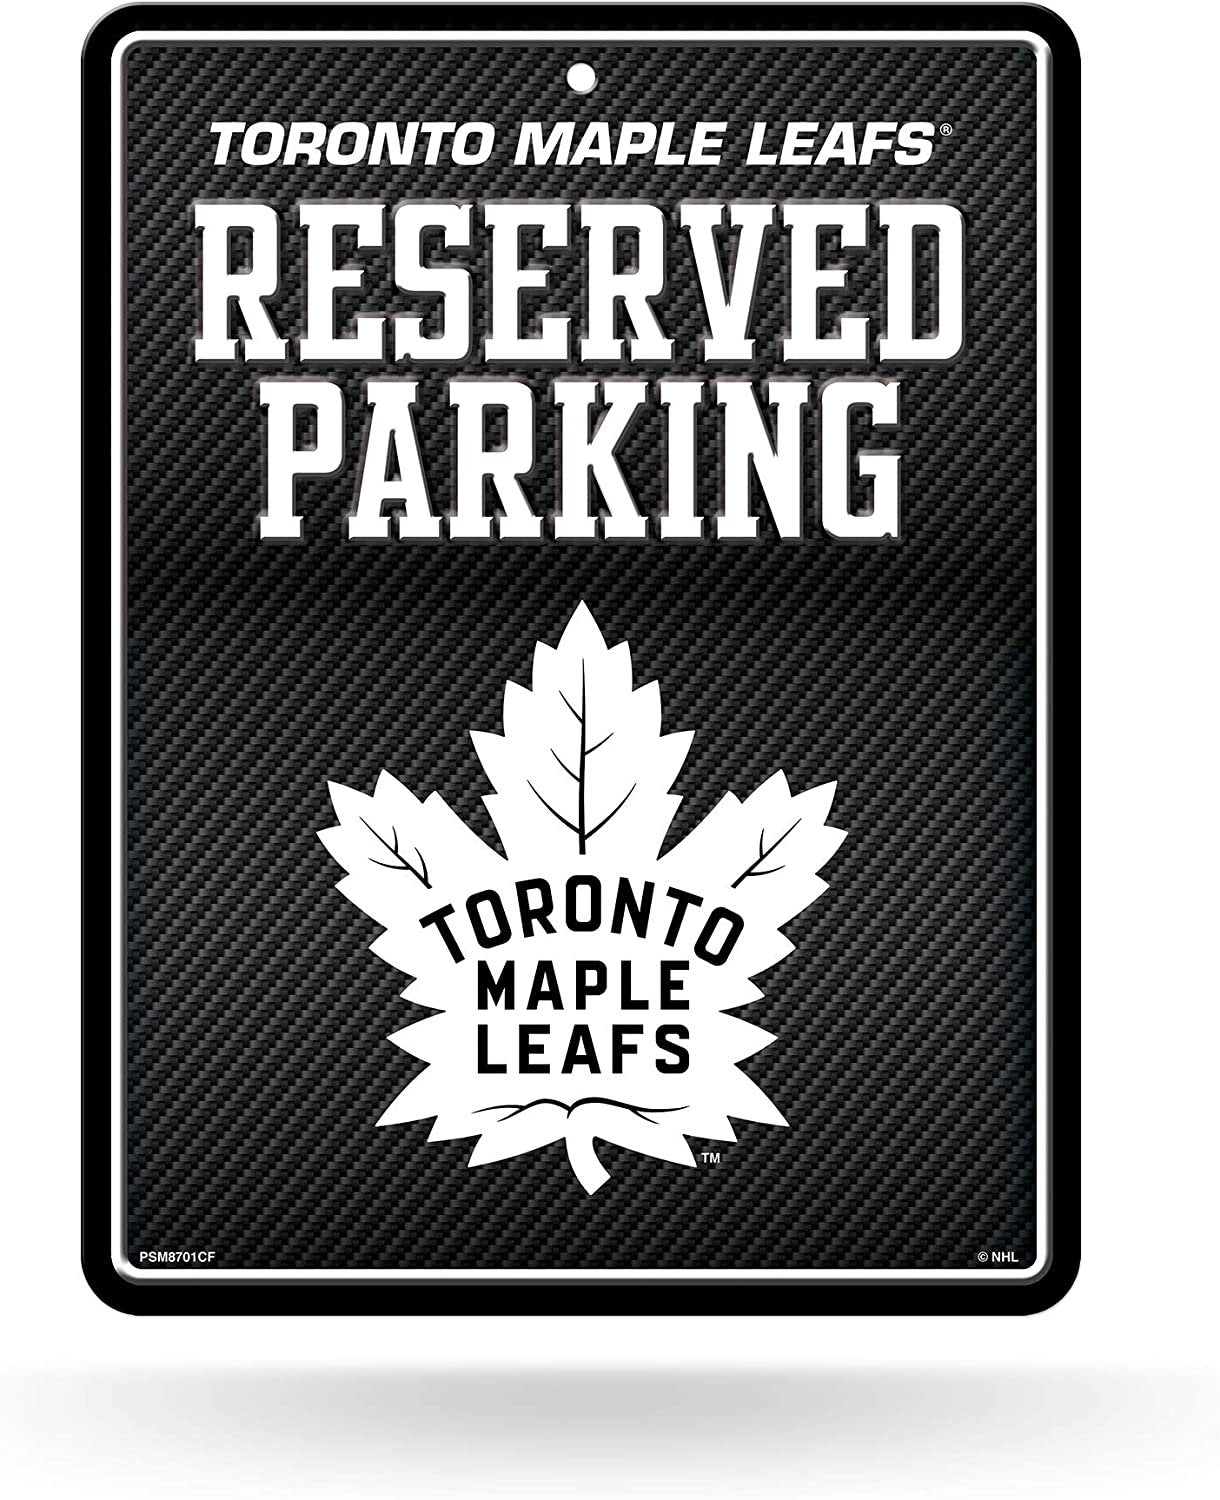 Toronto Maple Leafs Metal Parking Novelty Wall Sign 8.5 x 11 Inch Carbon Fiber Design